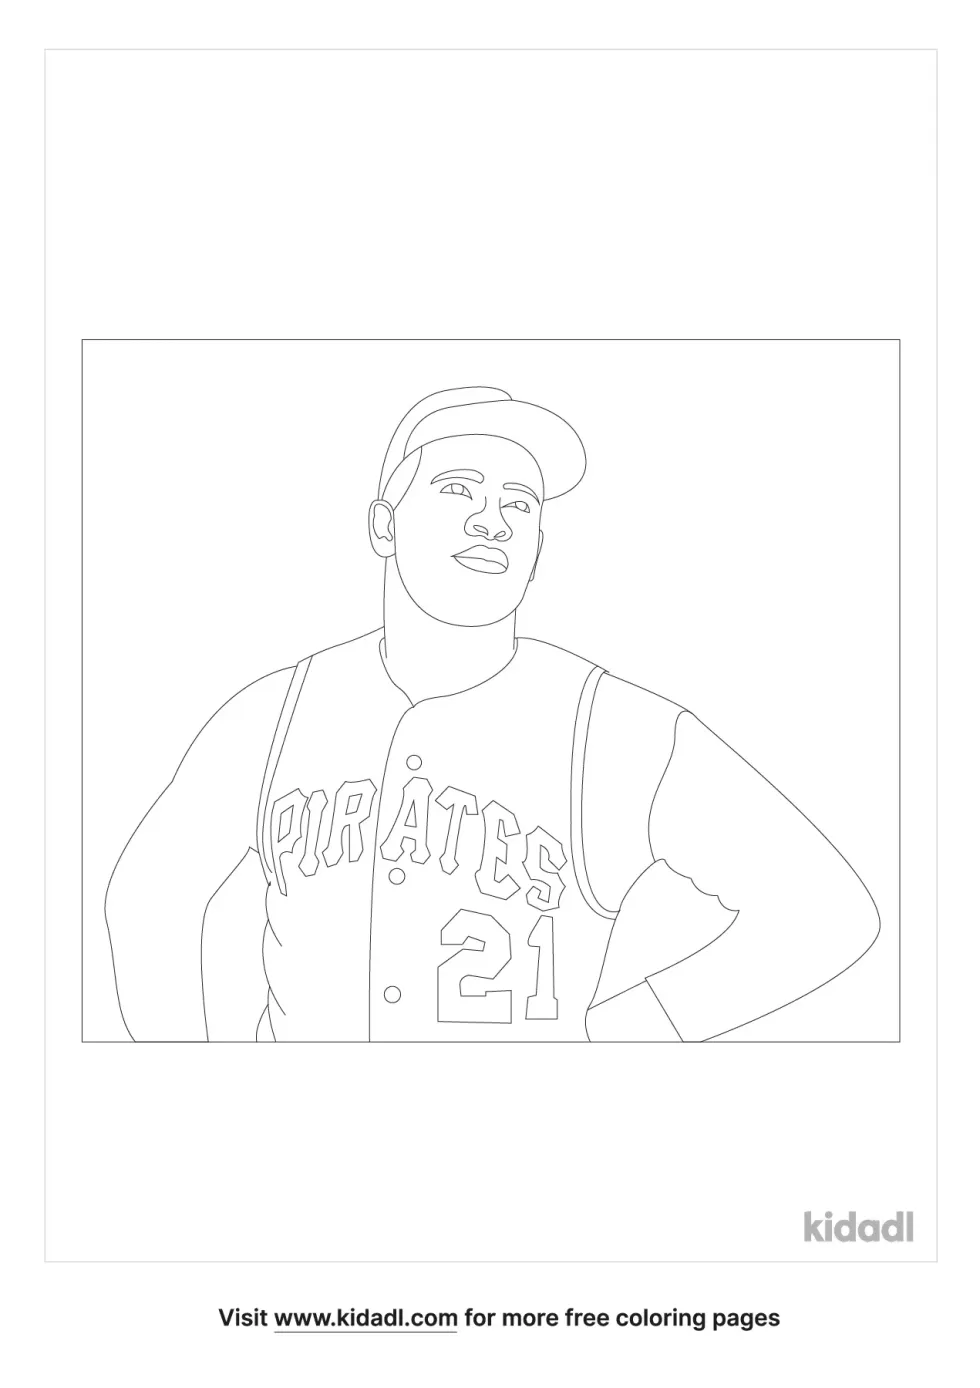 Roberto Clemente Coloring Page